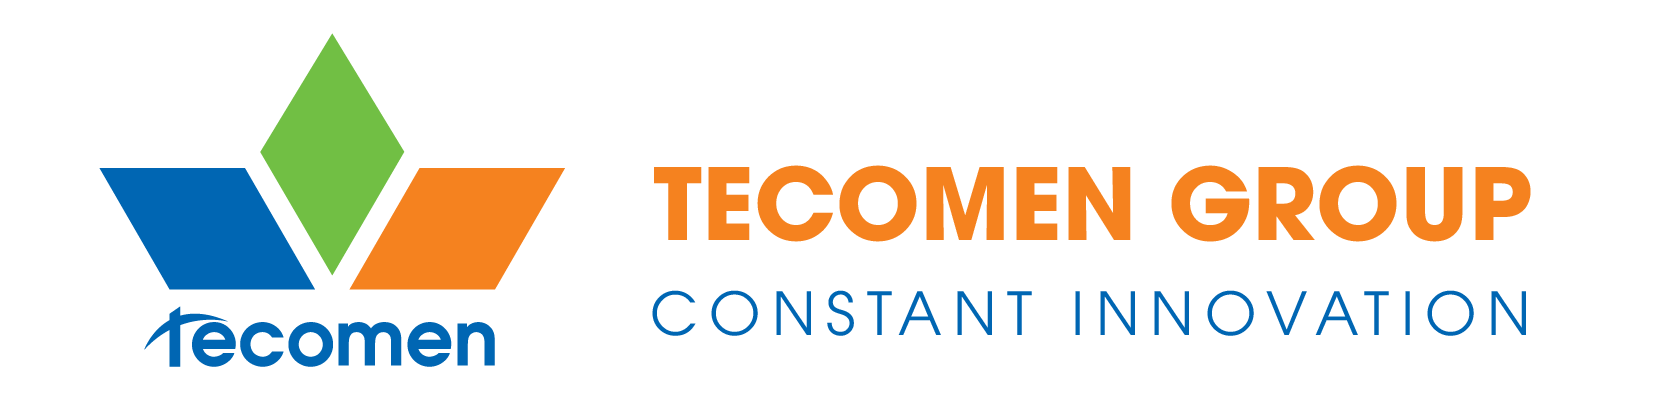 Tecomen Vietnam - The Leading Manufacturer Of Water & Air Filtration Products